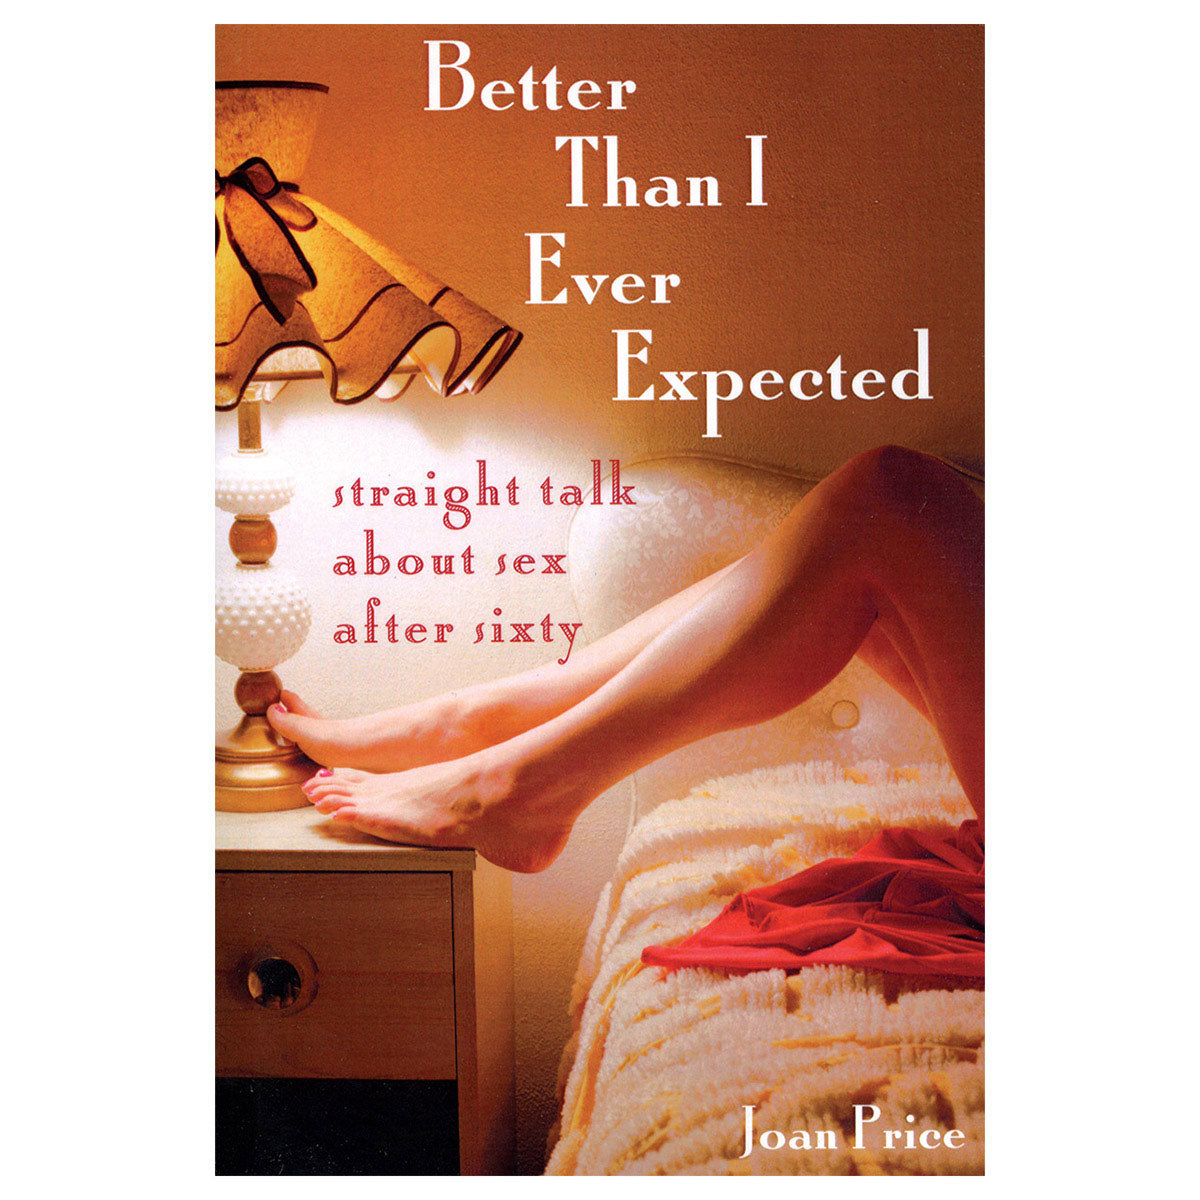 Better Than I Ever Expected - Straight Talk About Sex After Sixty - Seal Press